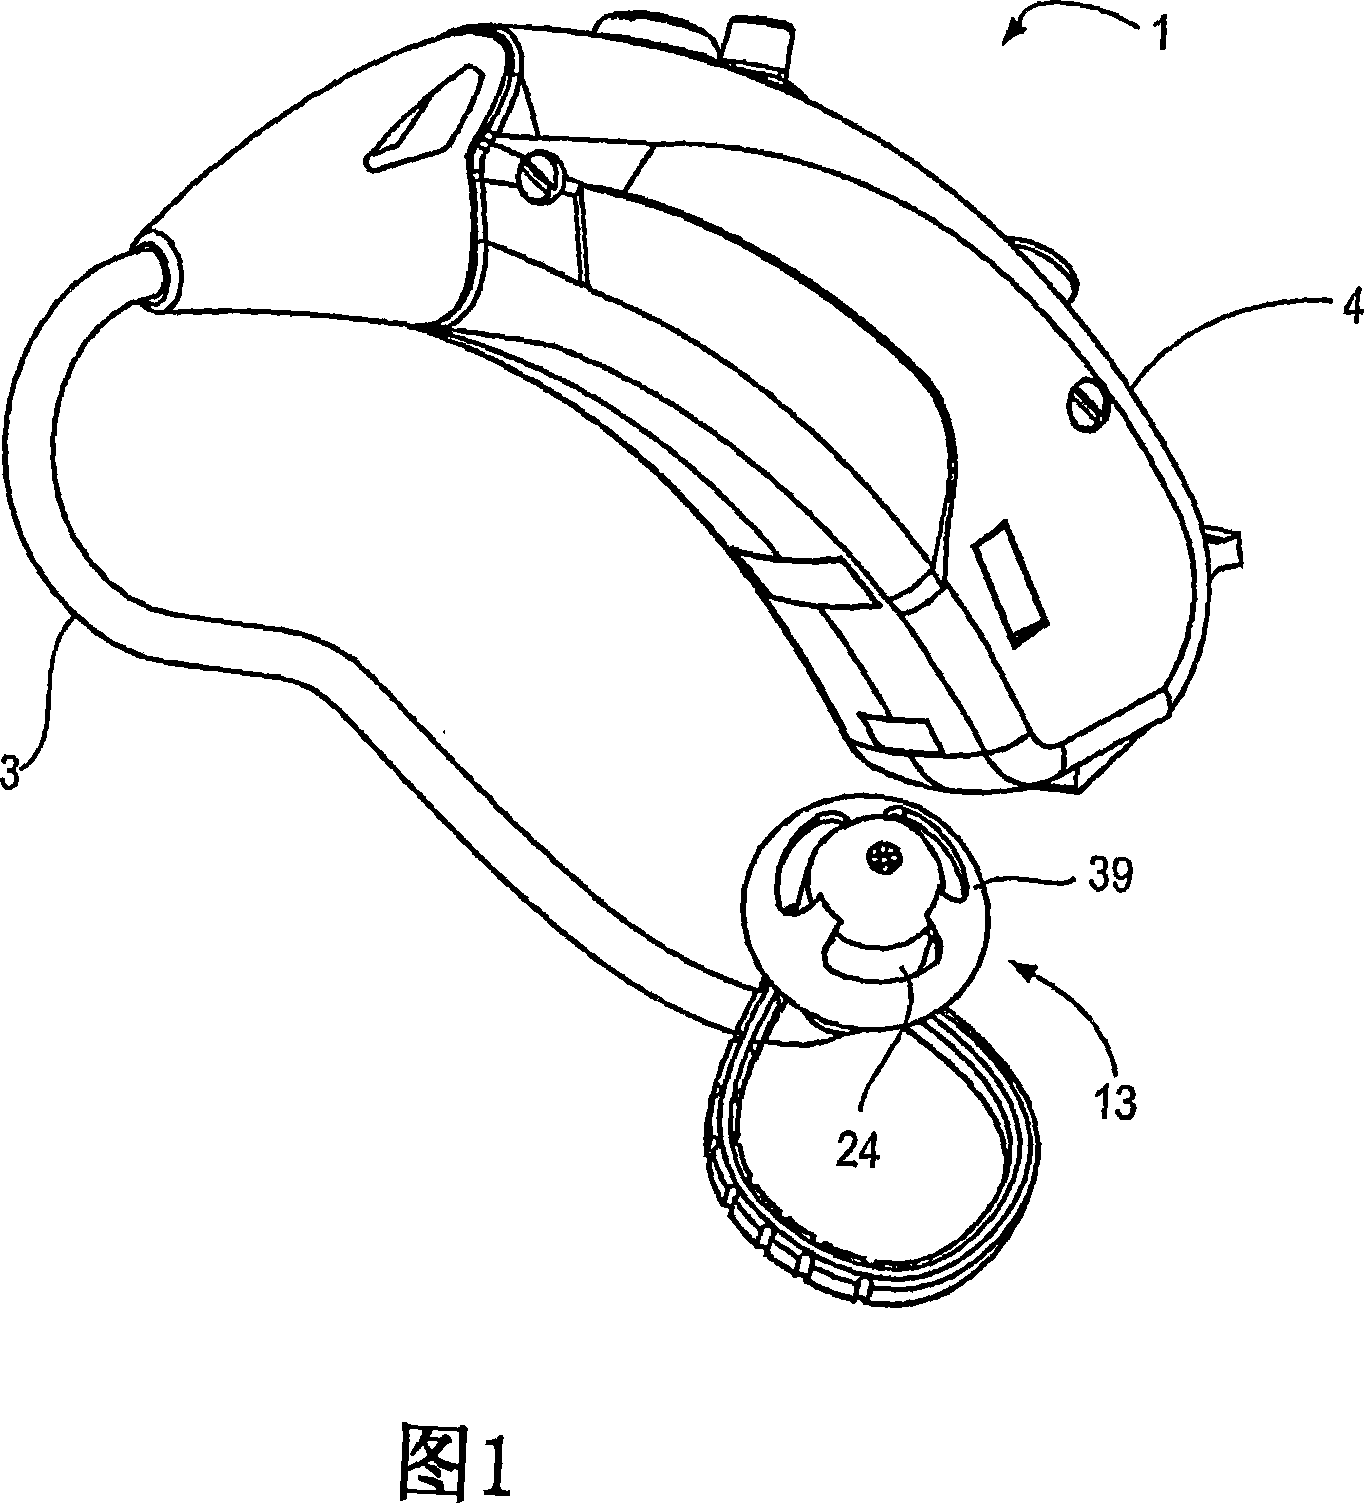 Hearing aid and an ear piece for a hearing aid